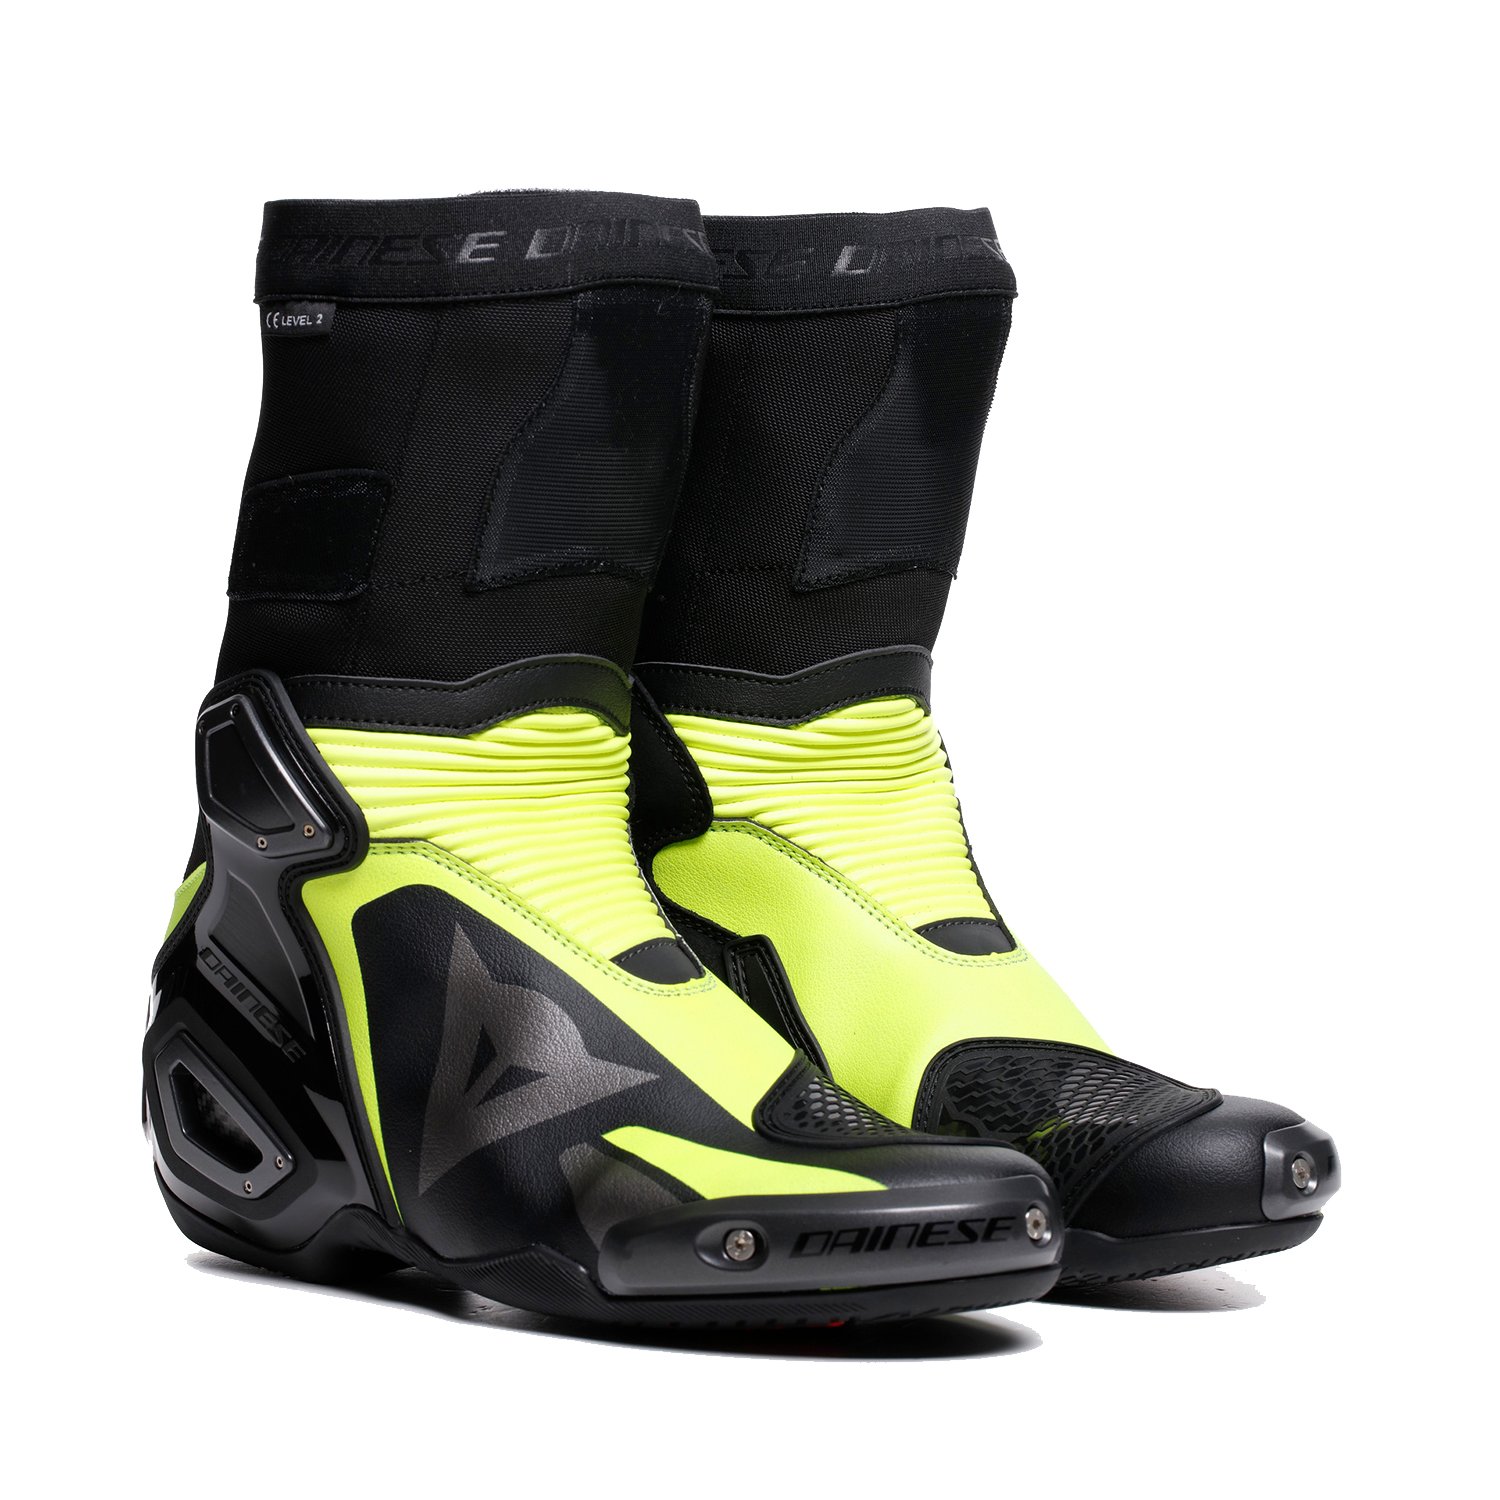 Image of Dainese Axial 2 Boots Black Yellow Fluo Size 46 EN